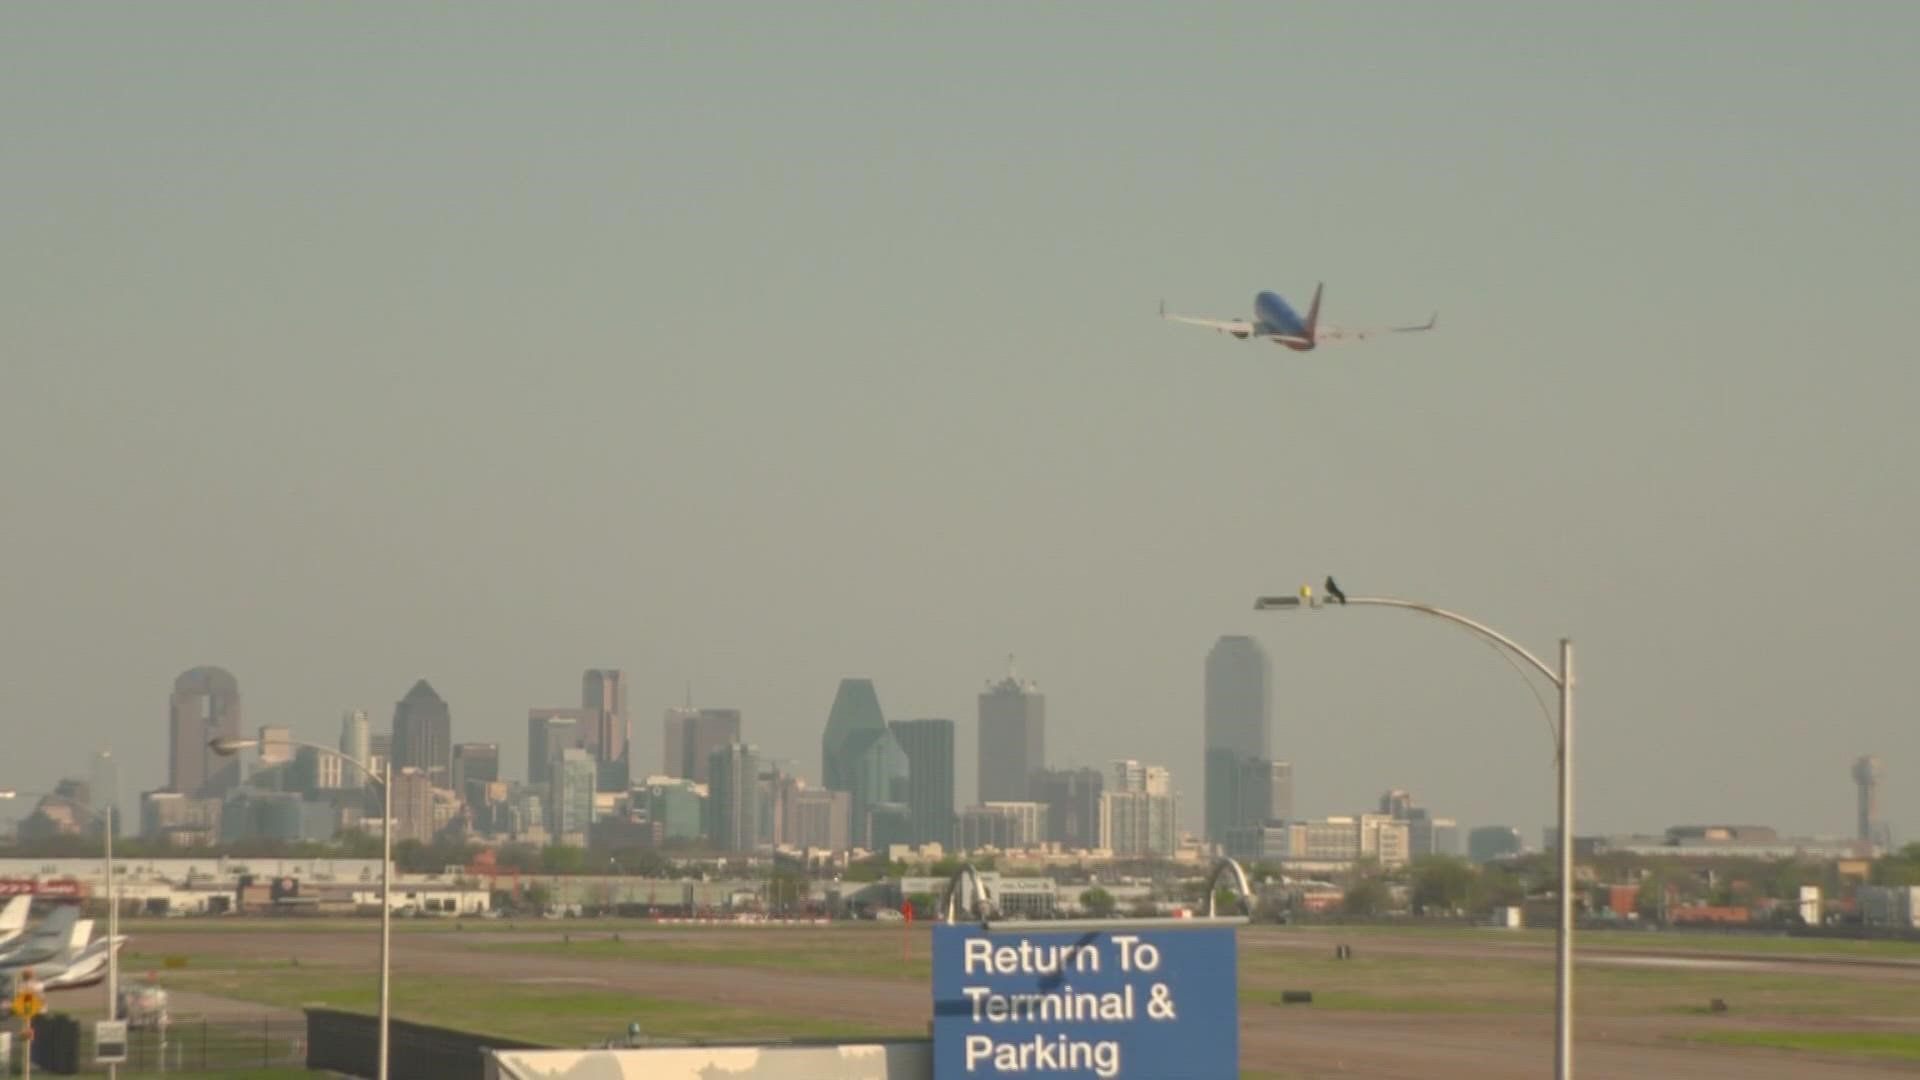 A Southwest Airlines employee was allegedly punched in the head by a passenger at Dallas Love Field. The industry has seen an uptick in unruly passengers.